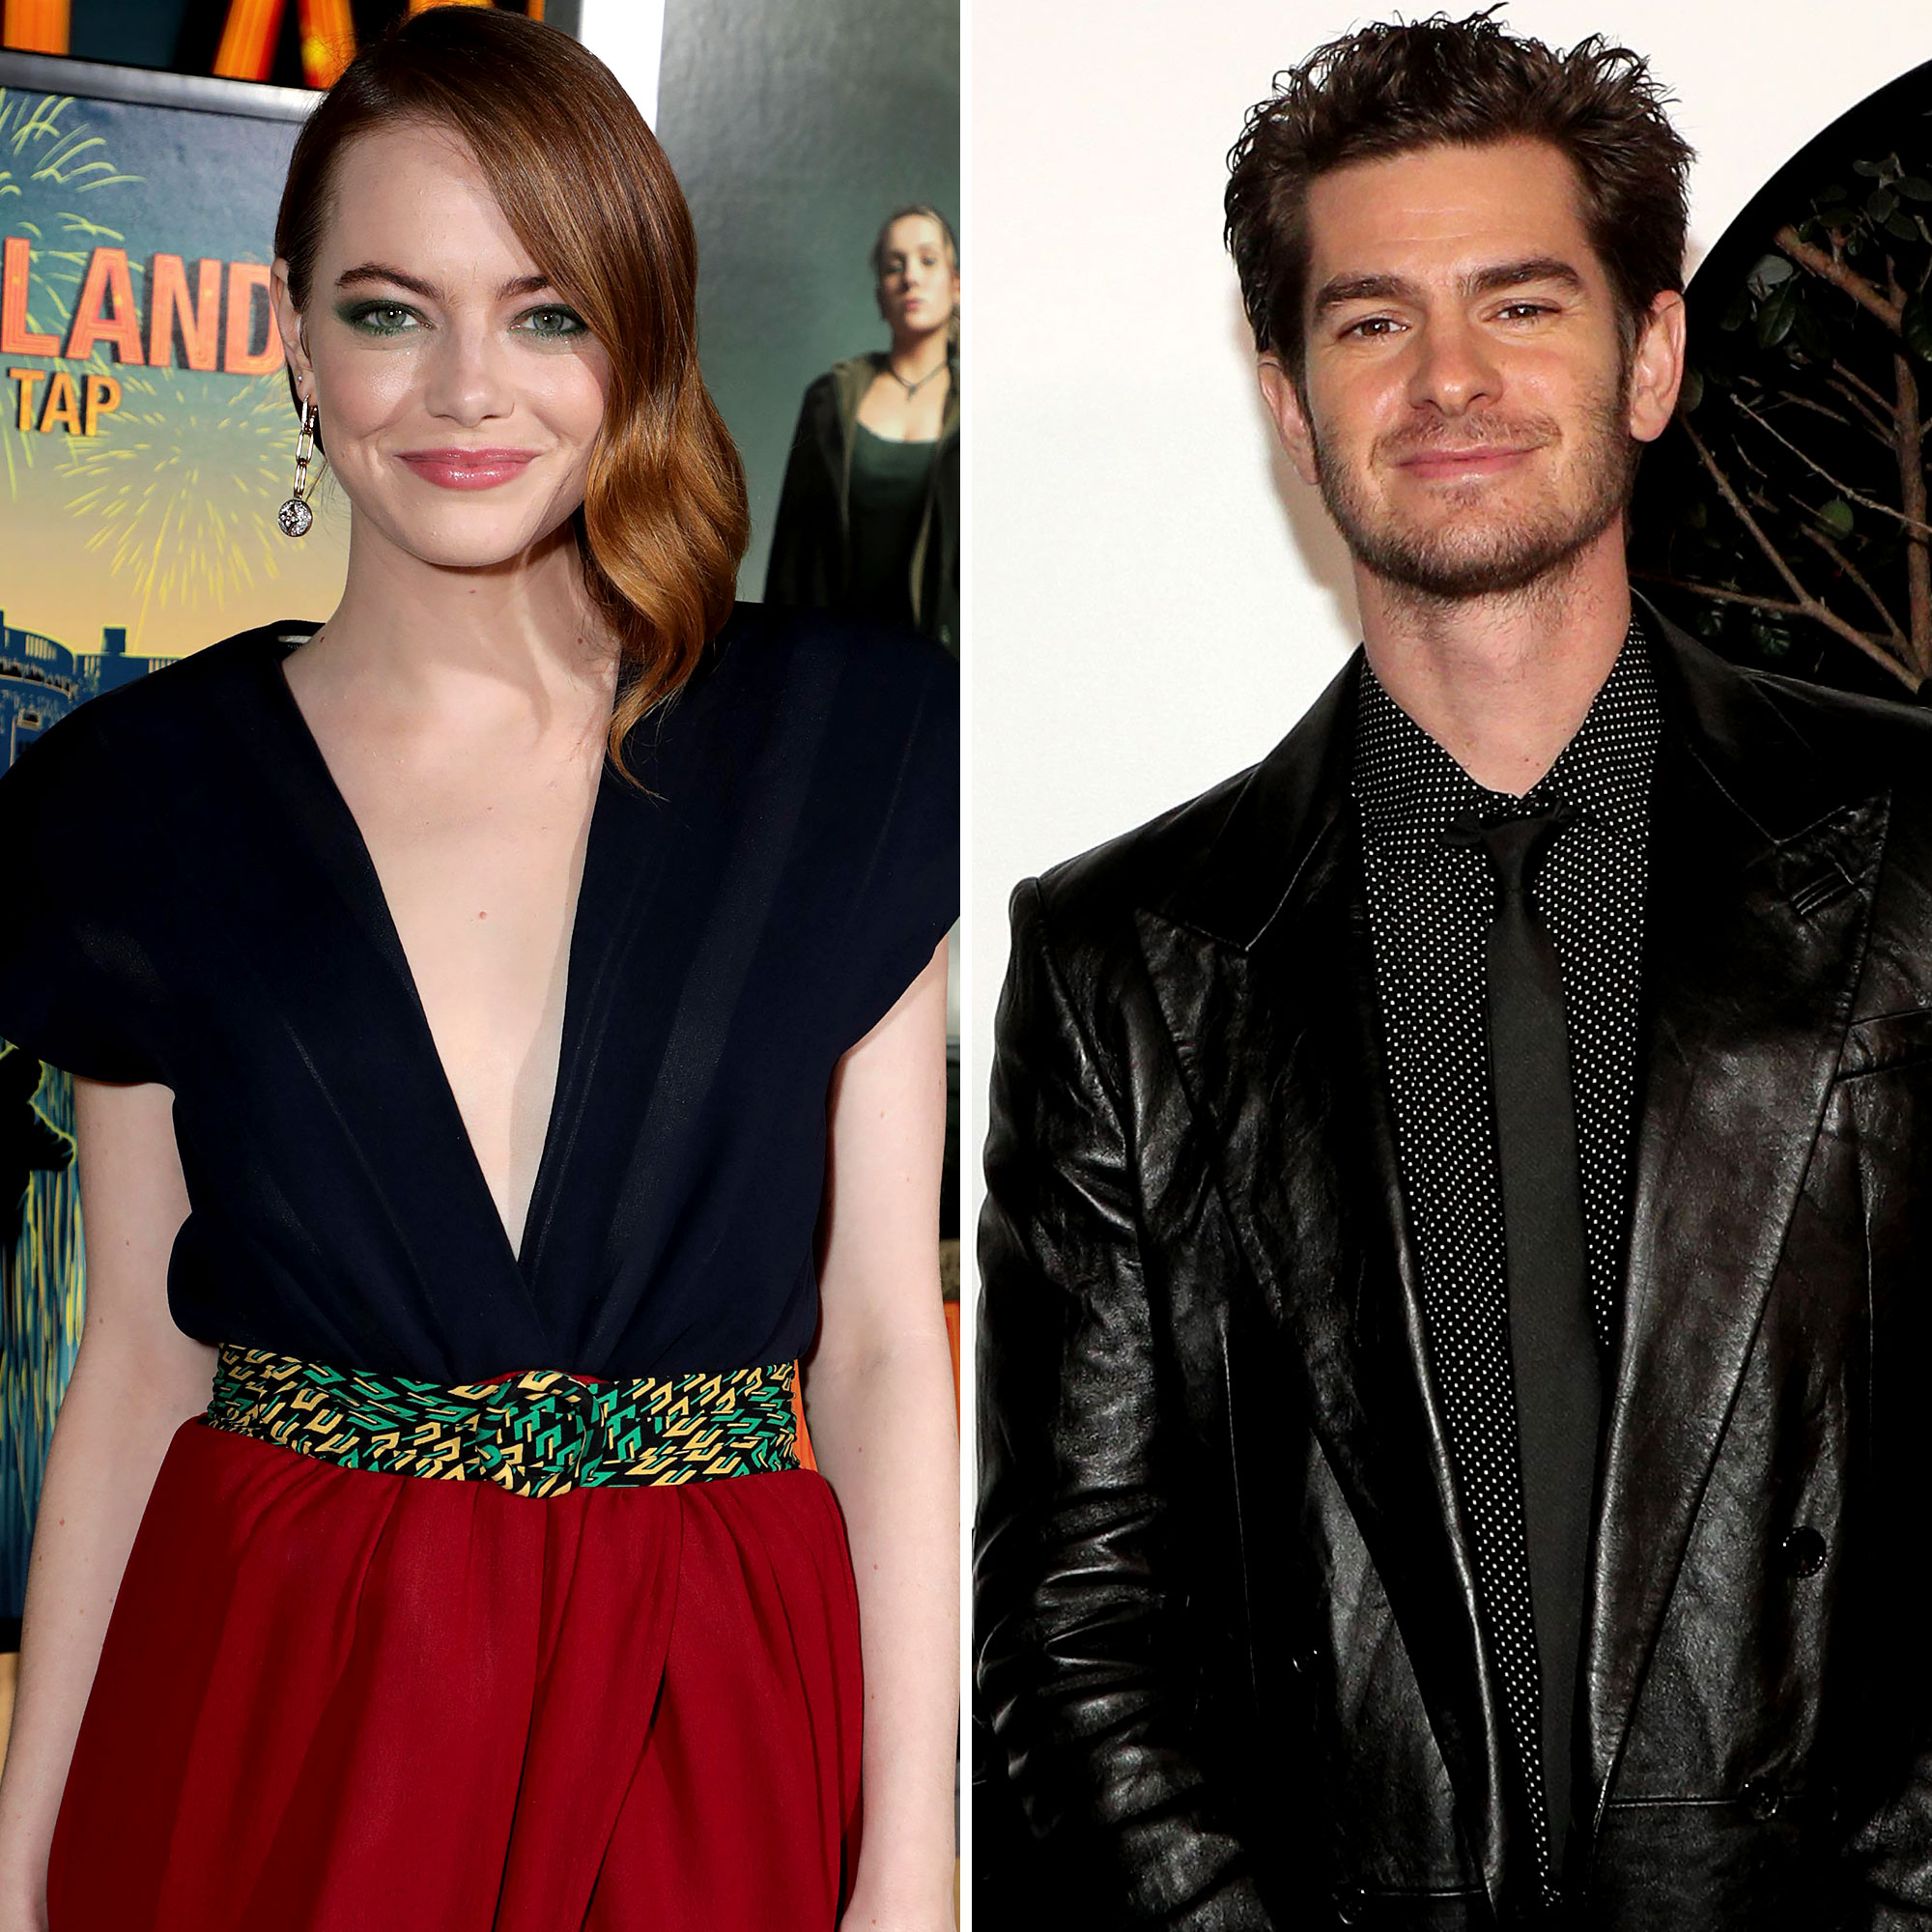 At last, Emma Stone and Andrew Garfield are getting married